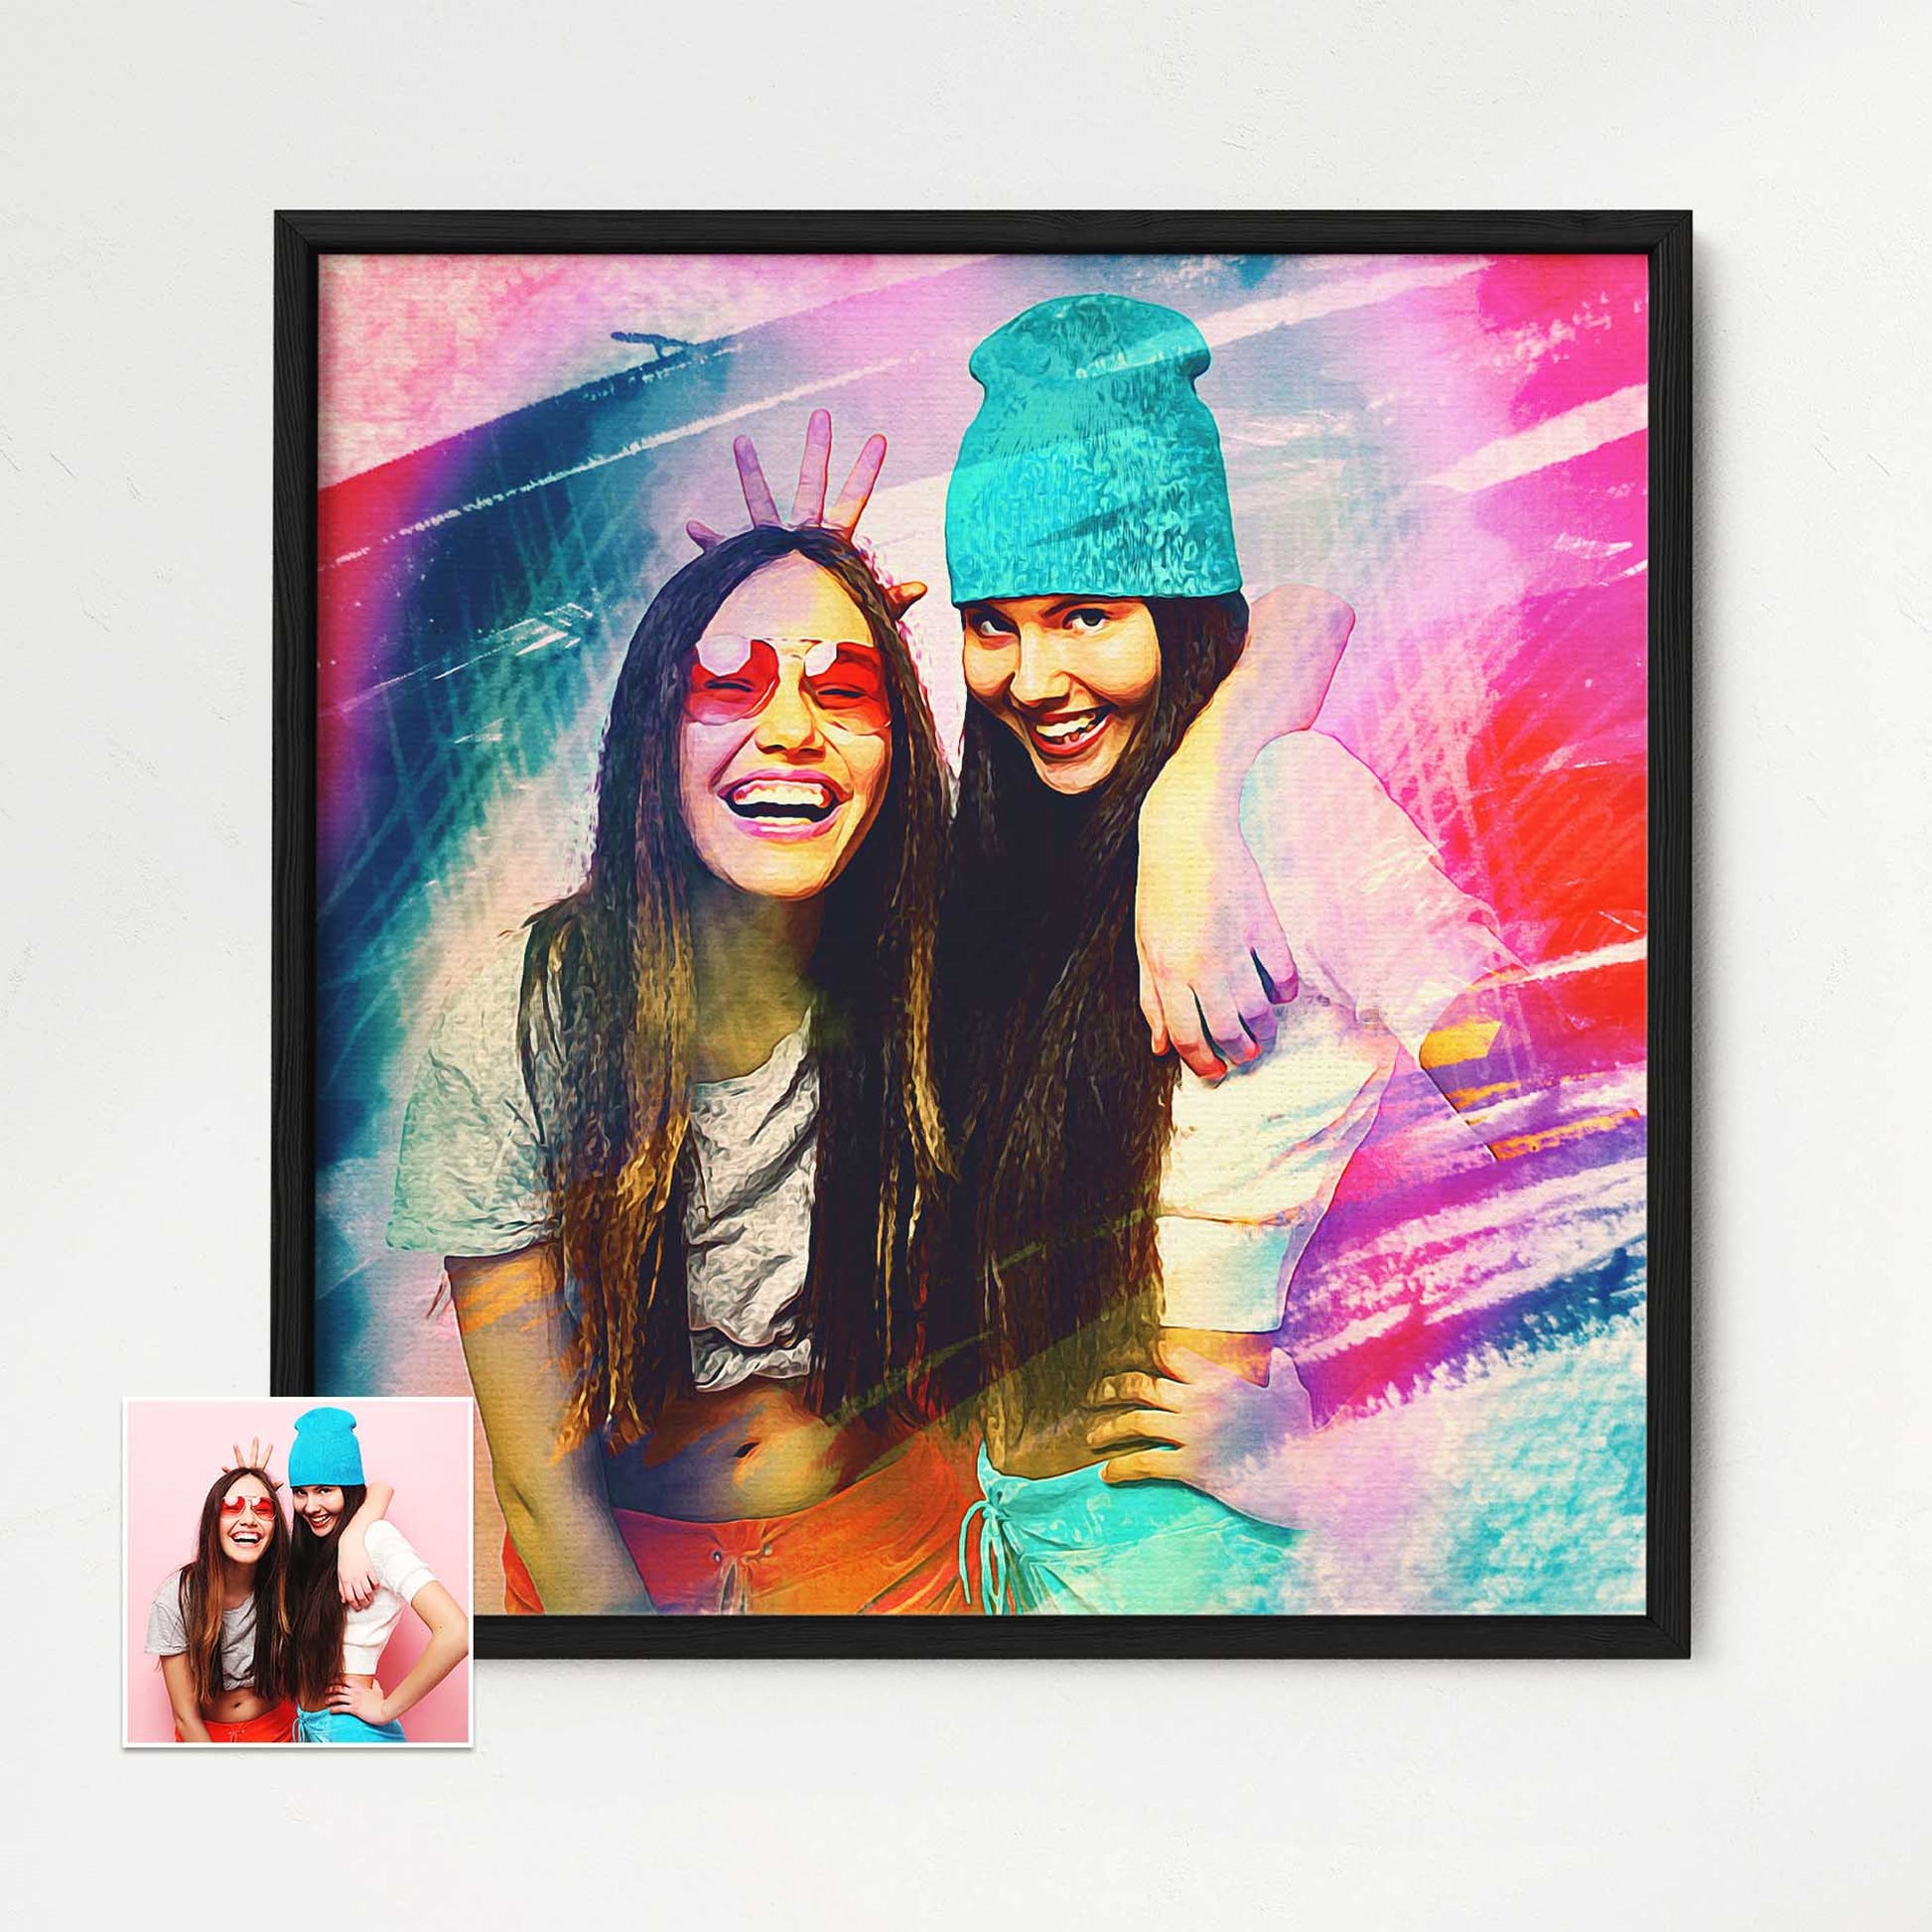 Elevate your interior design with our Personalised Artistic Brush Painting Framed Print. This original artwork, created from your photo, is a true expression of imagination and creativity. The beautiful brushwork and vibrant colors